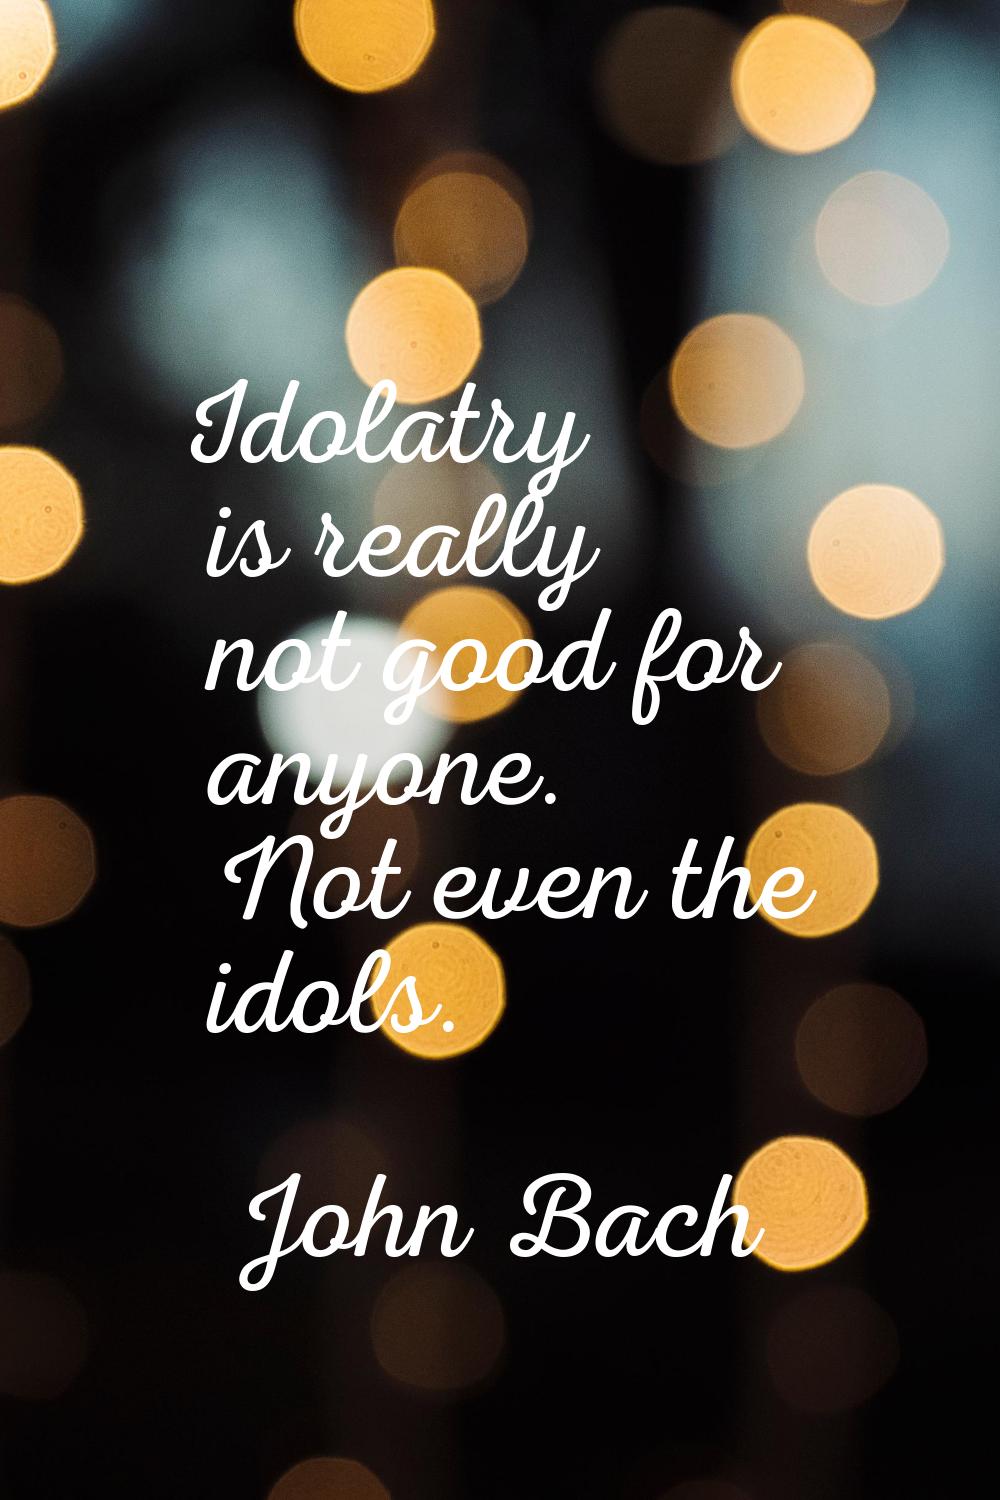 Idolatry is really not good for anyone. Not even the idols.